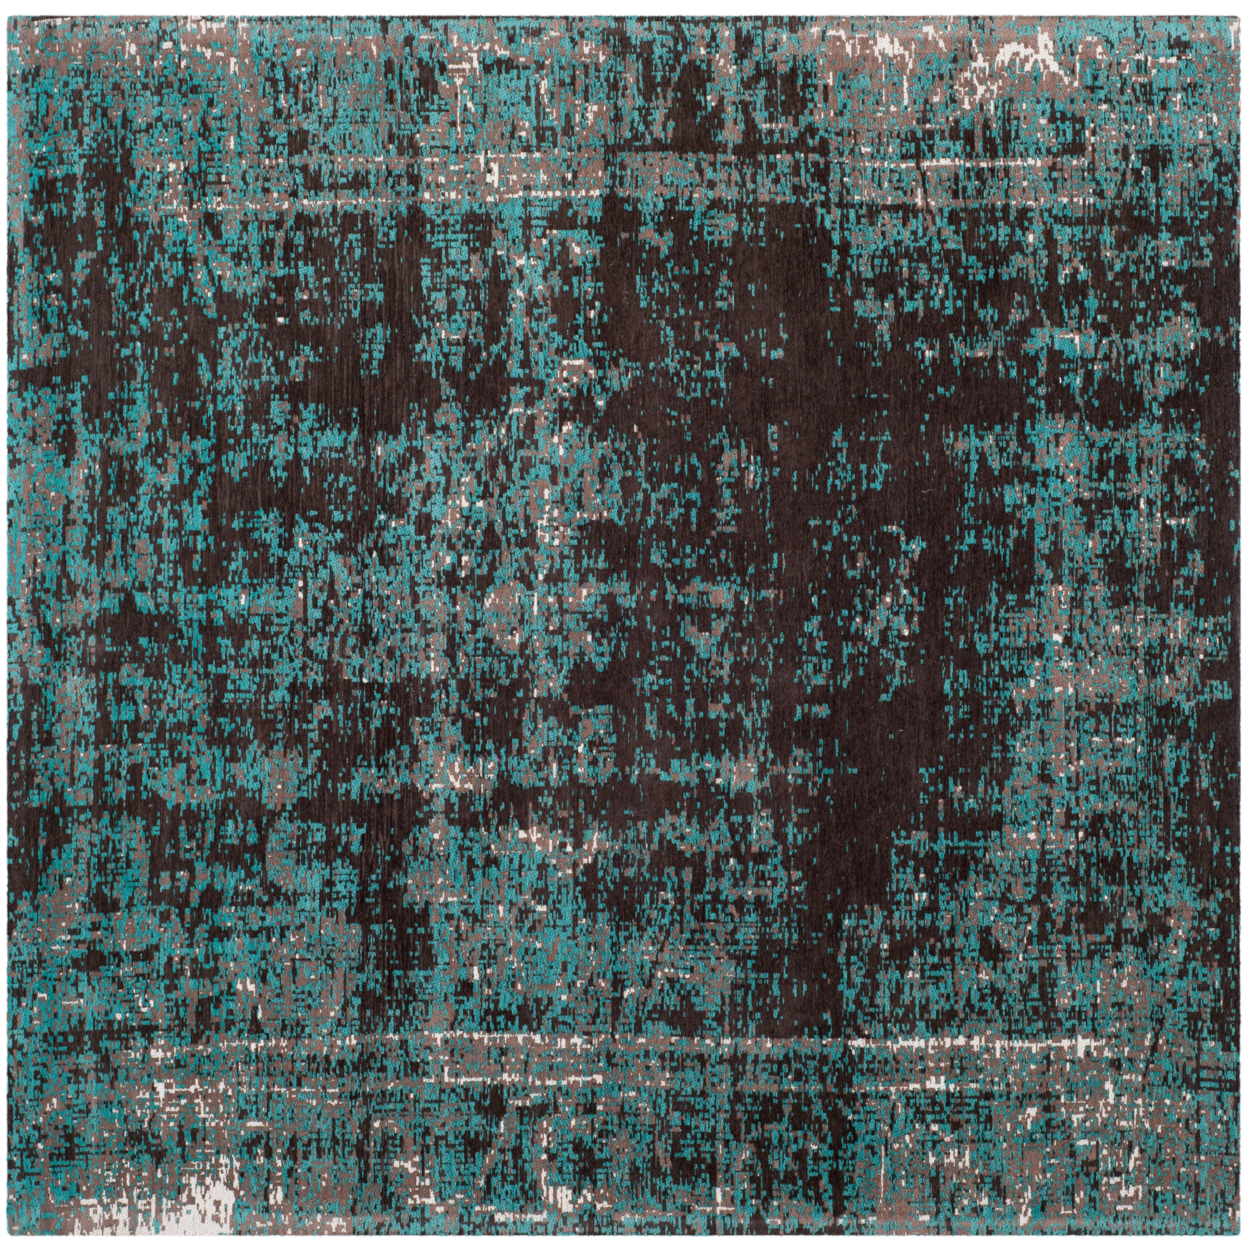 SAFAVIEH Classic Vintage CLV225A Teal / Brown Rug - 6' Square